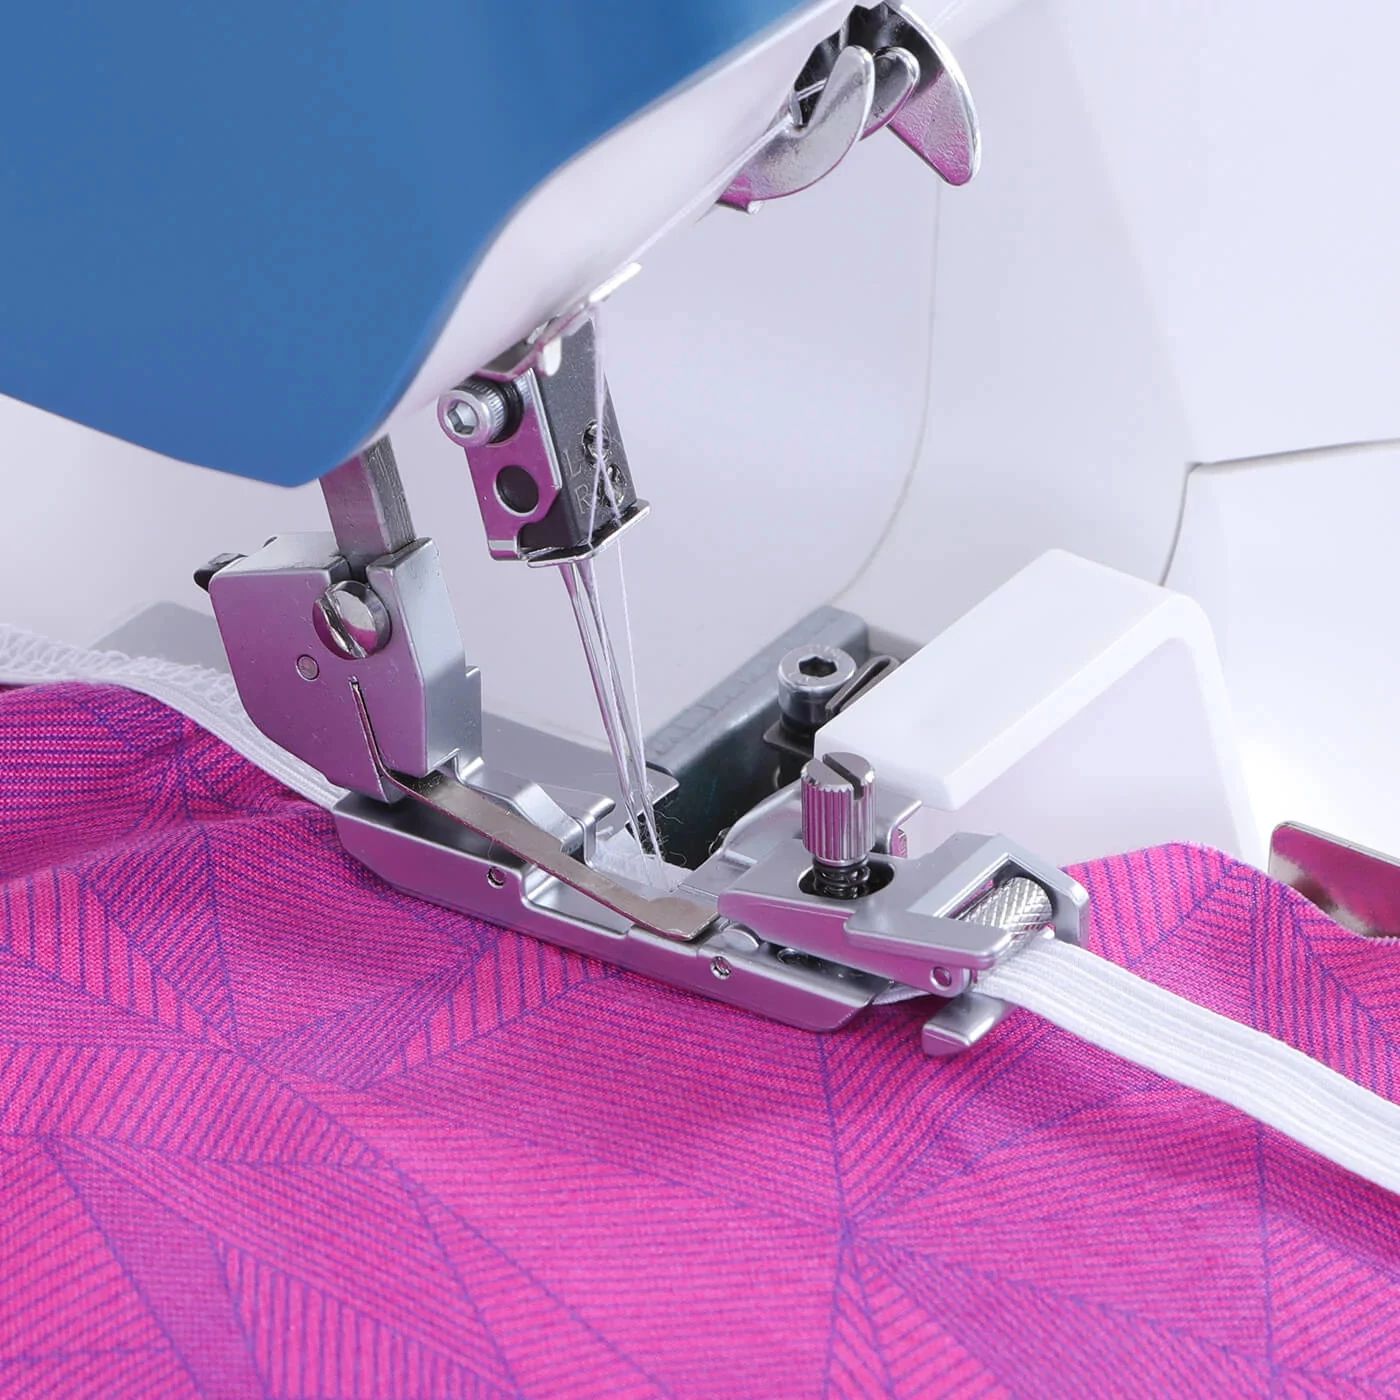 How To Use The Sewing Machine Roller Foot - Let's Learn To Sew